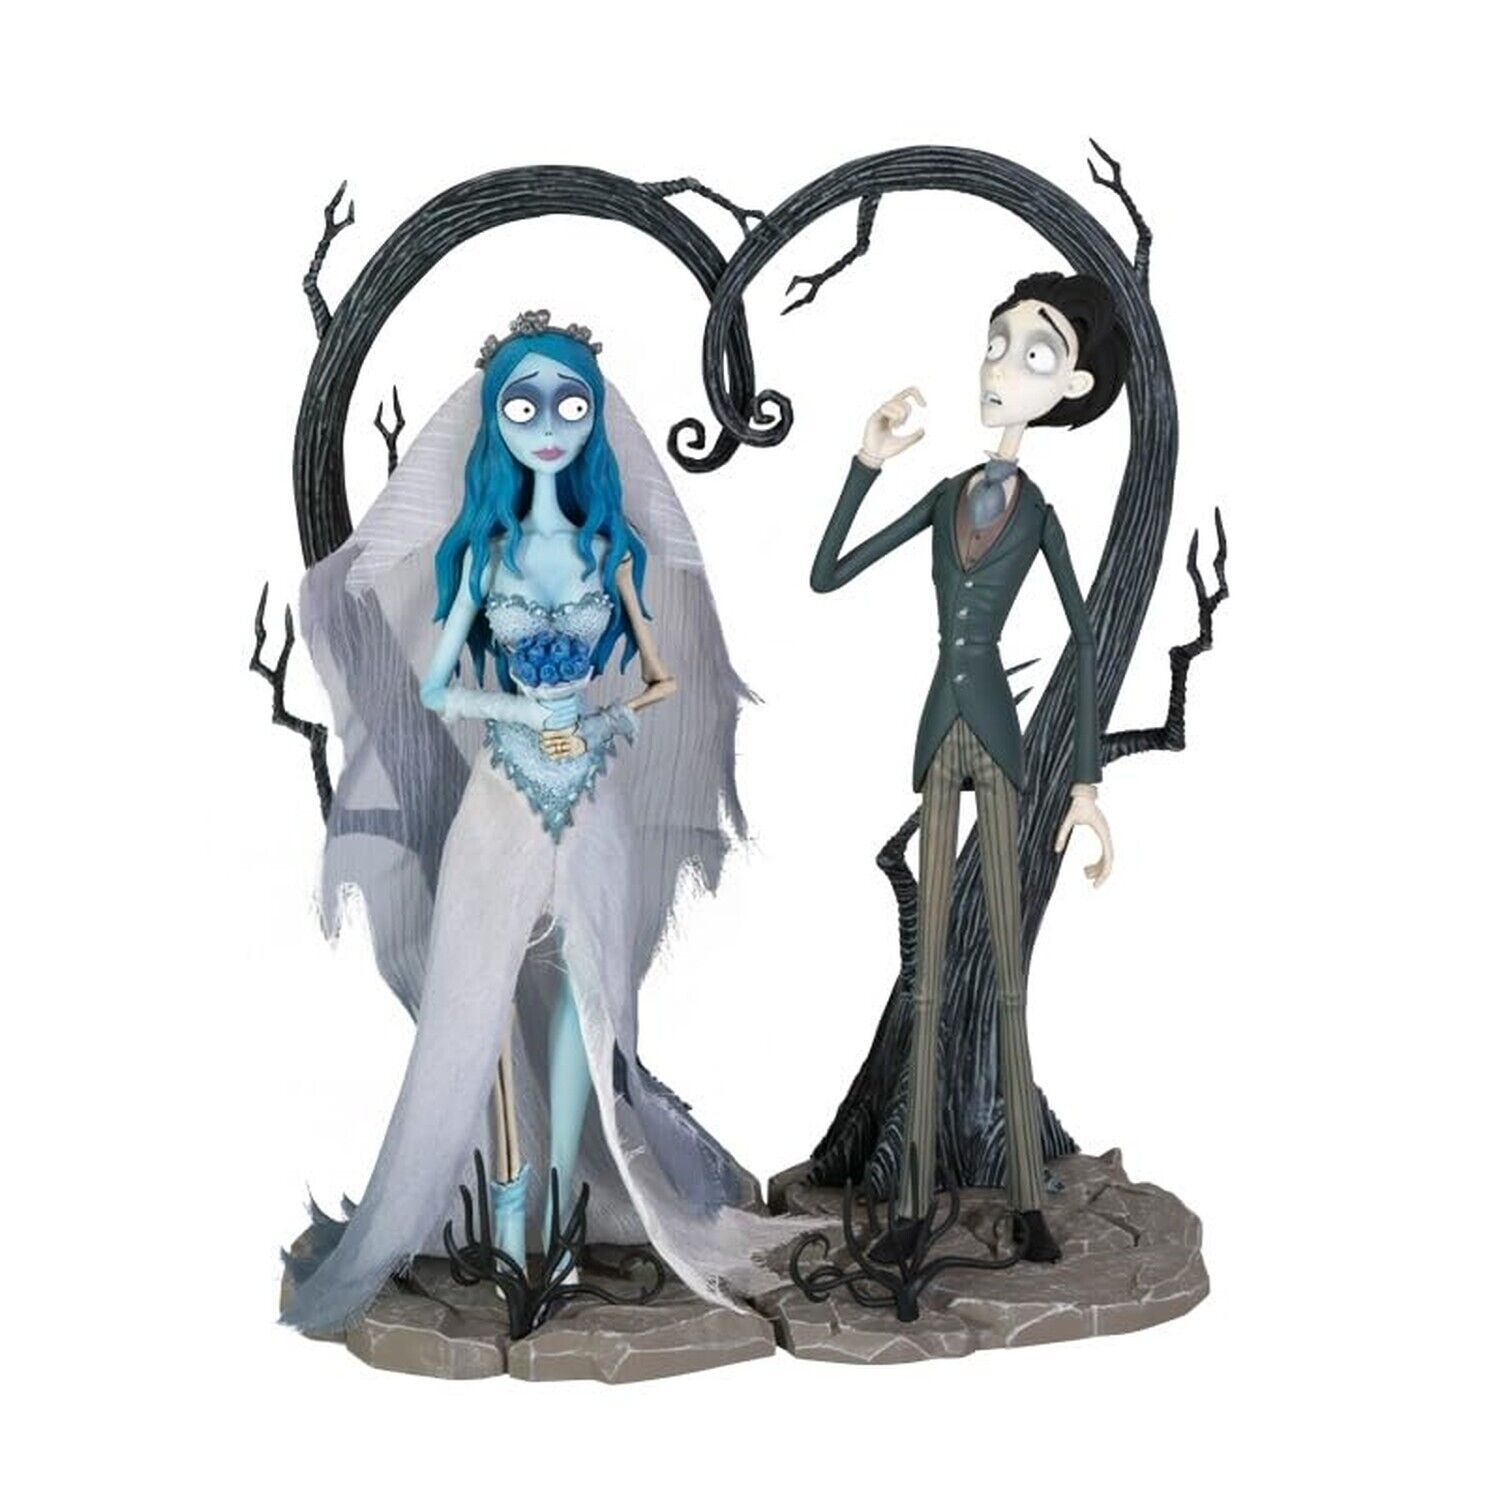 ABYSTYLE Studio Corpse Bride Exclusive Collectible Figurines Bundle: Emily an...